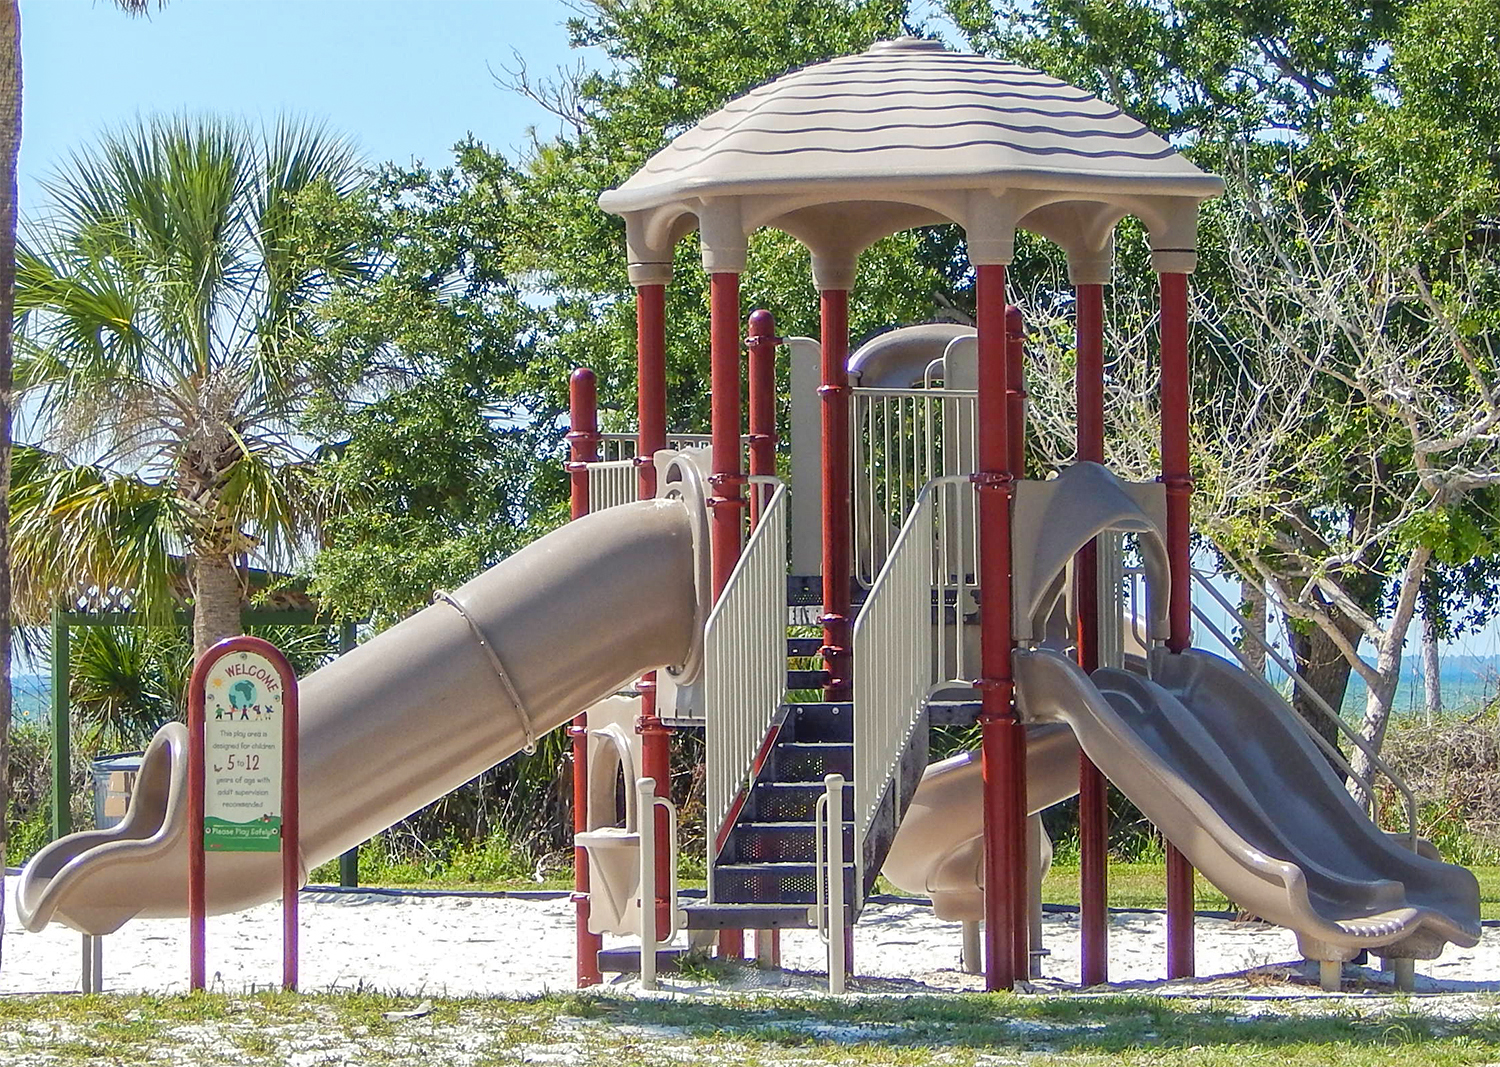 Playground With Tampa Bay In Background At Eg Simmons Park Ruskin Fl